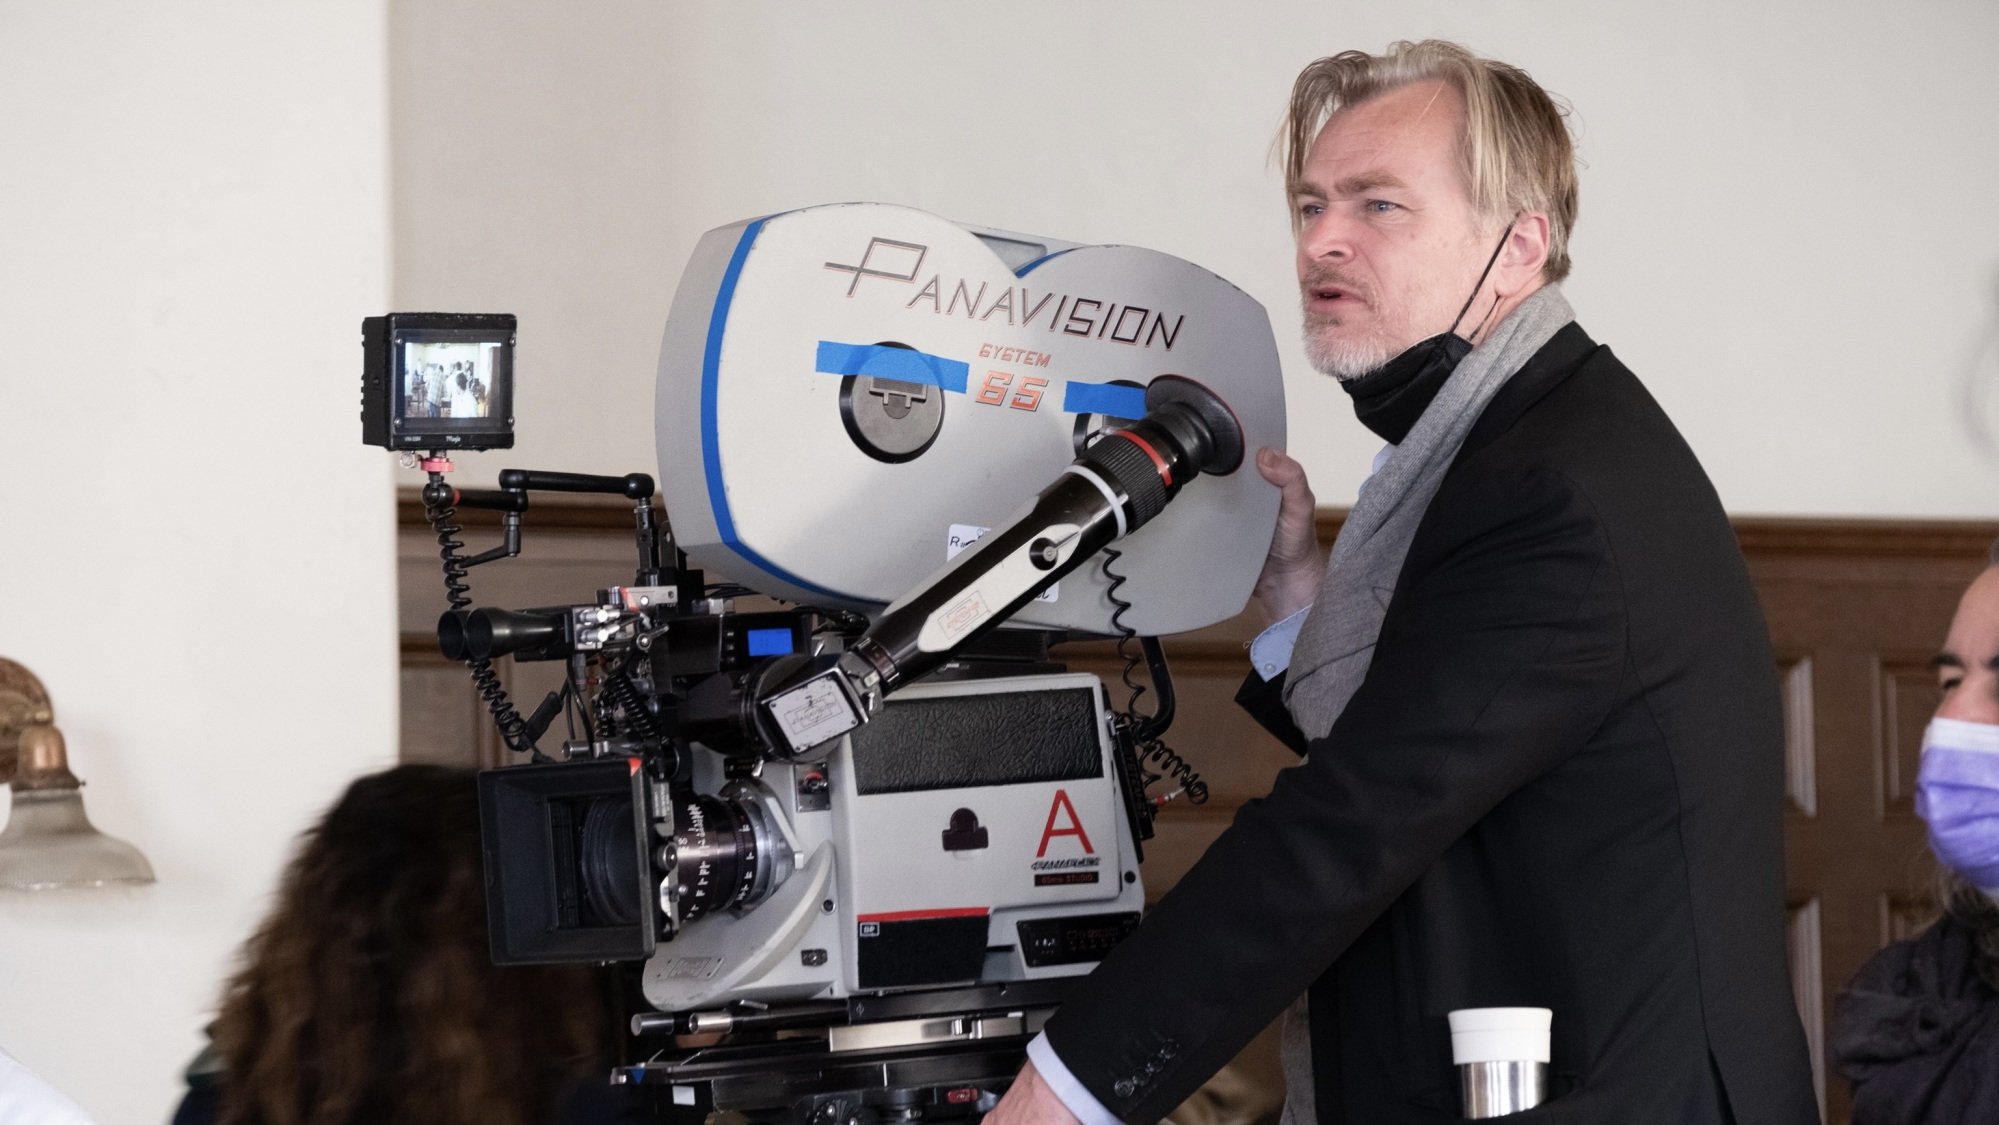 A man in a dark suit and grey scarf stands beside a large Panavision film camera.